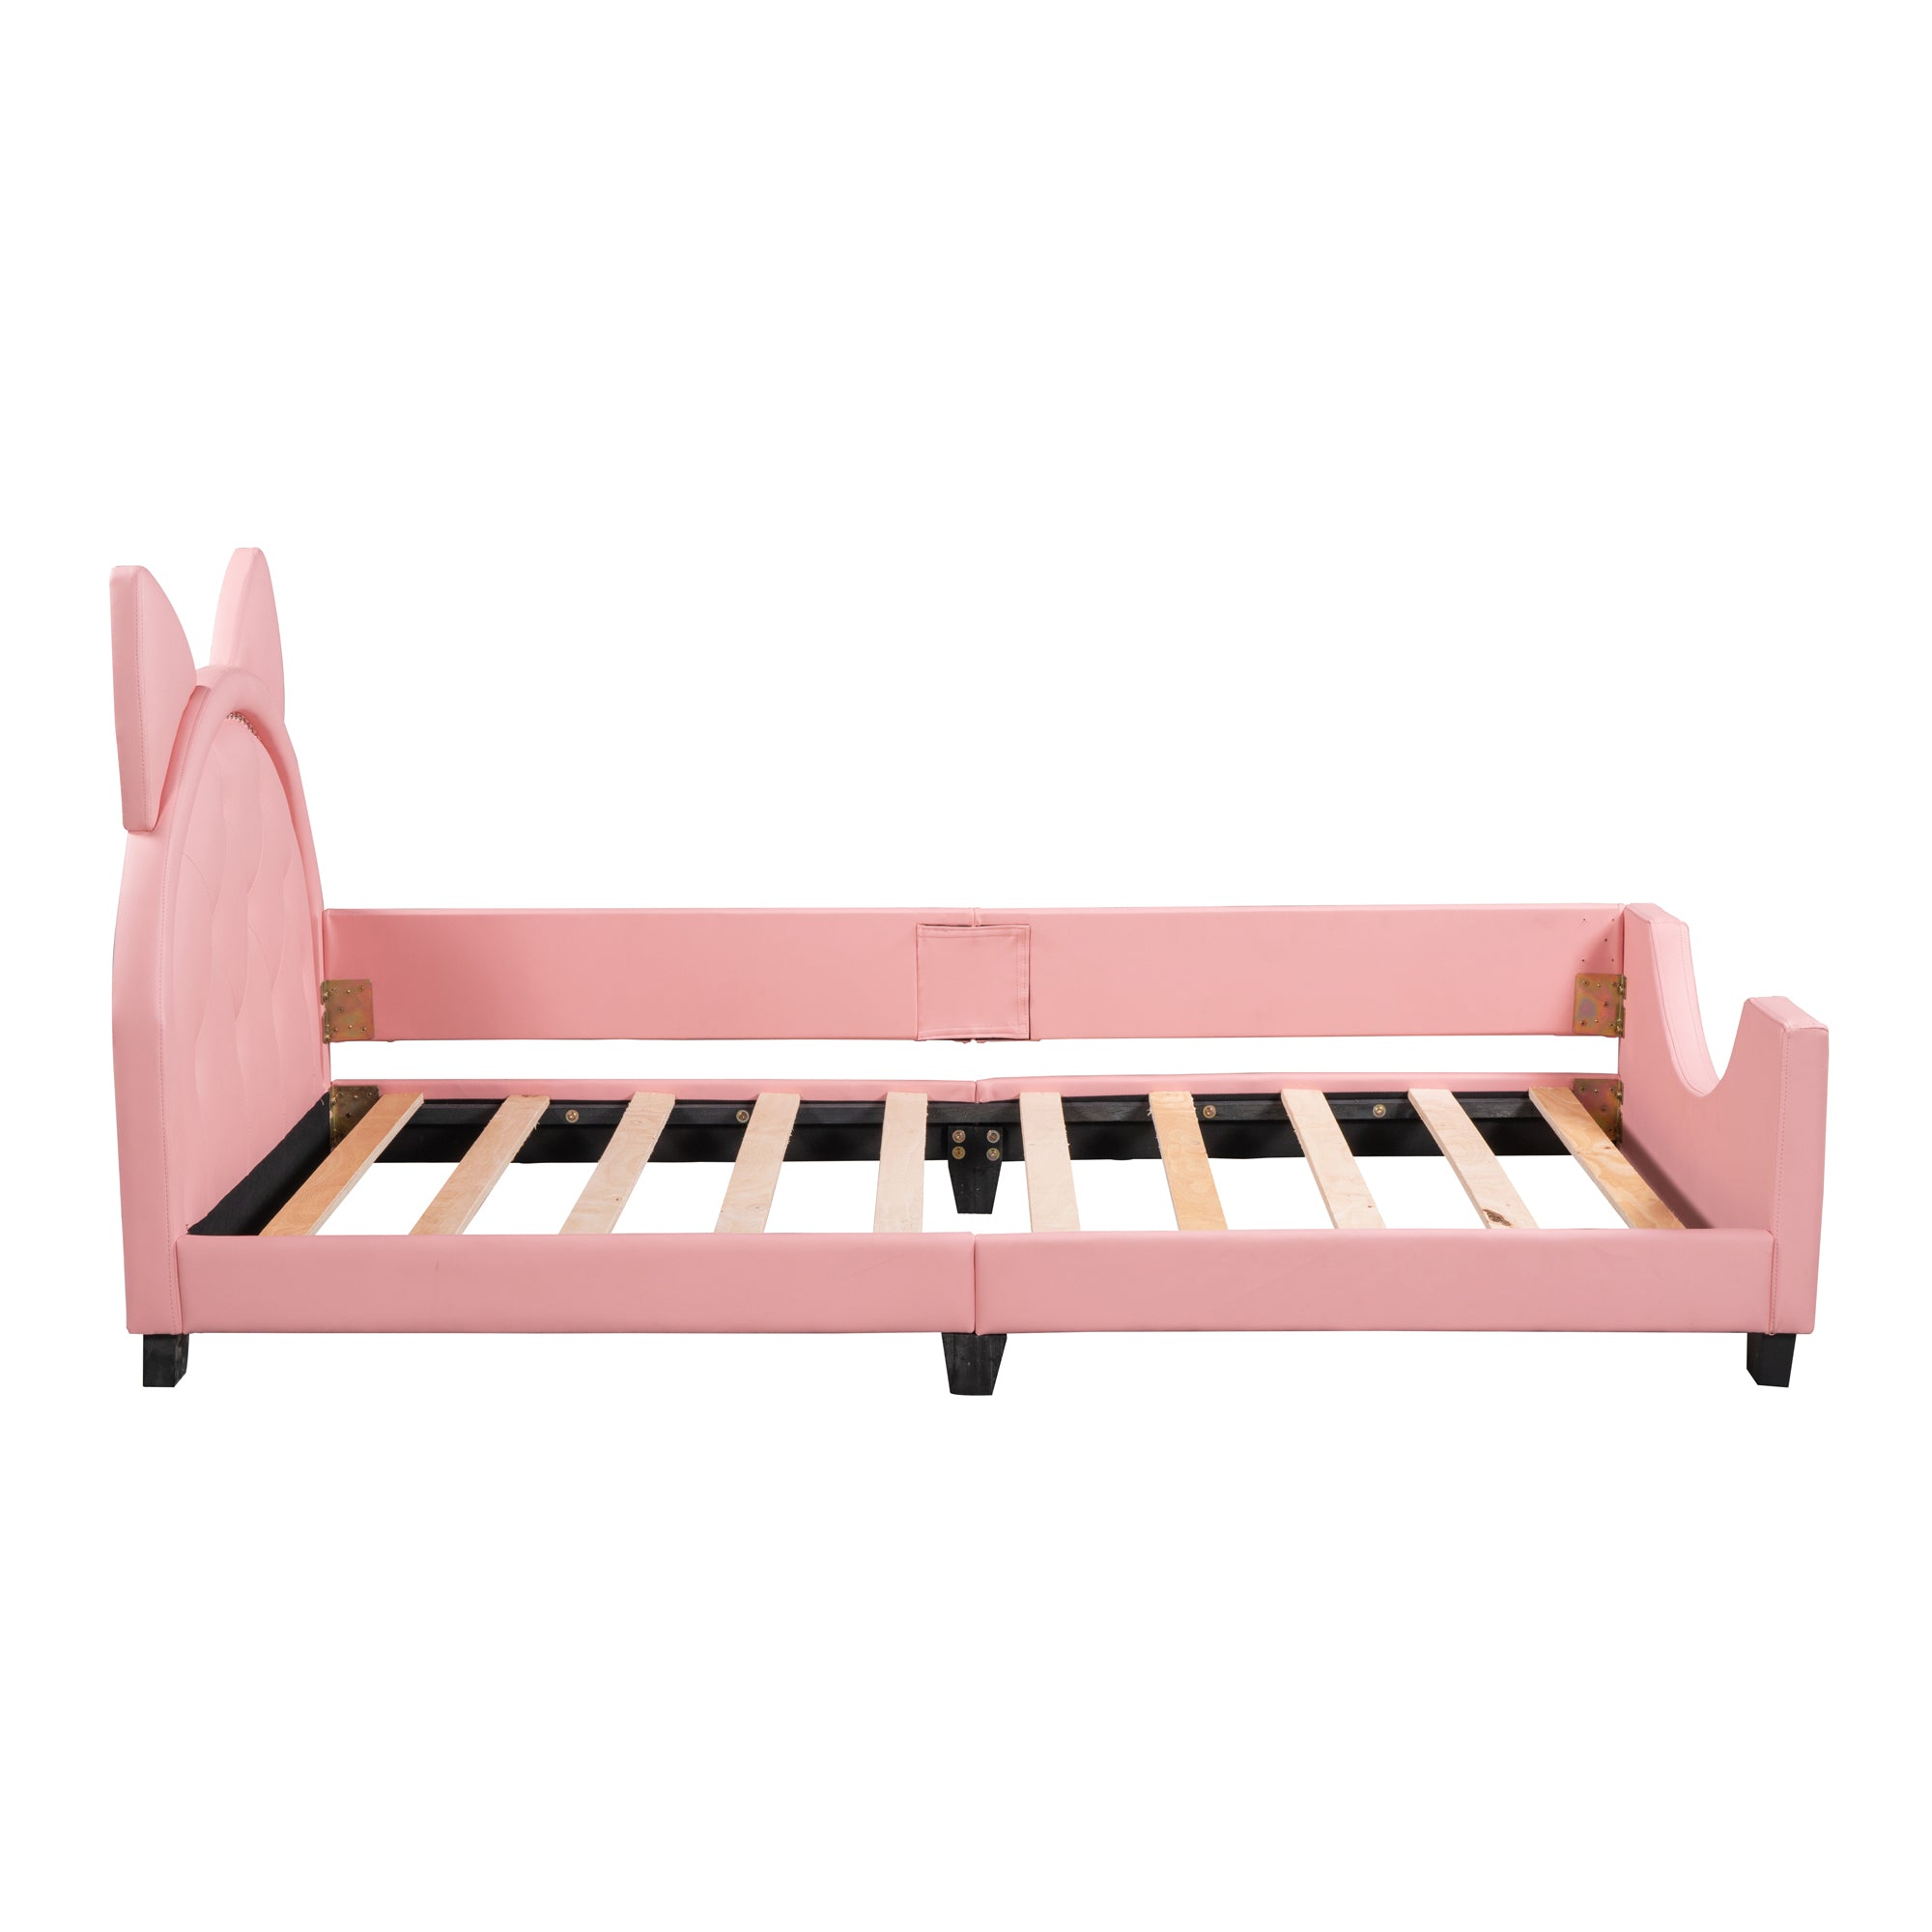 Twin Size Upholstered Daybed with Carton Ears Shaped pink-pu leather